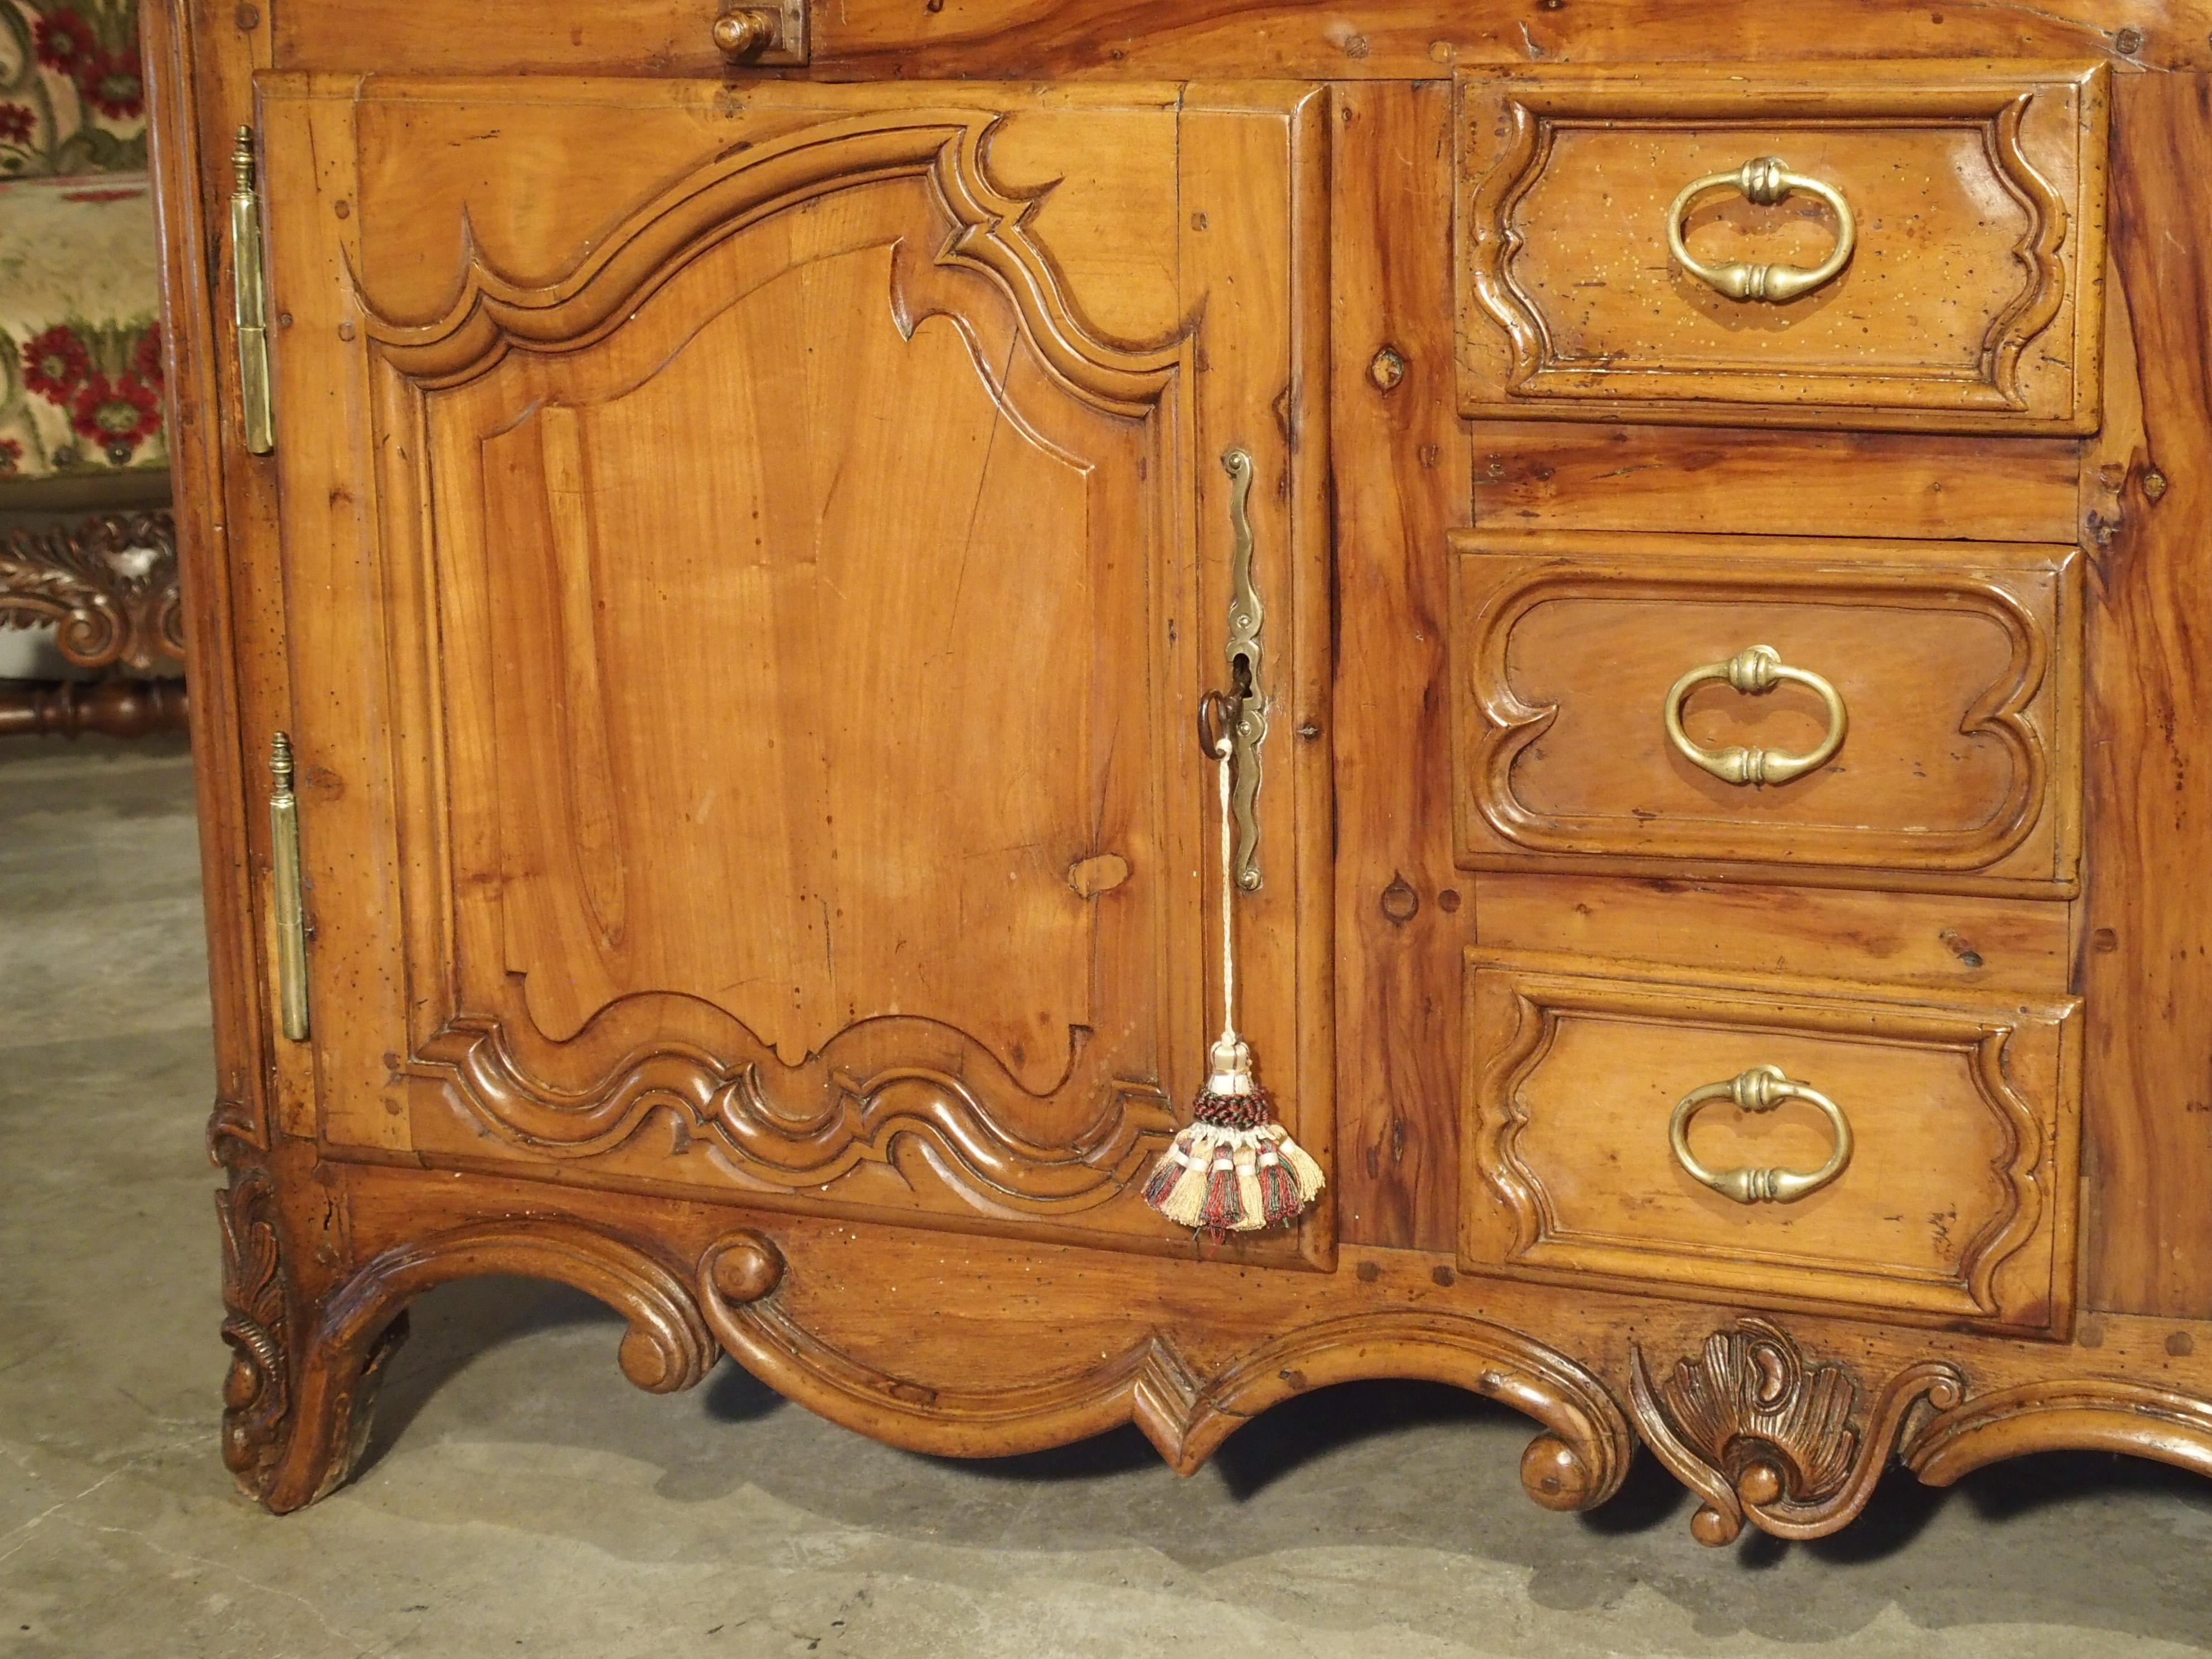 Hand-Carved Louis XV Cherrywood Bibliotheque Scriban from Burgundy, France, circa 1750